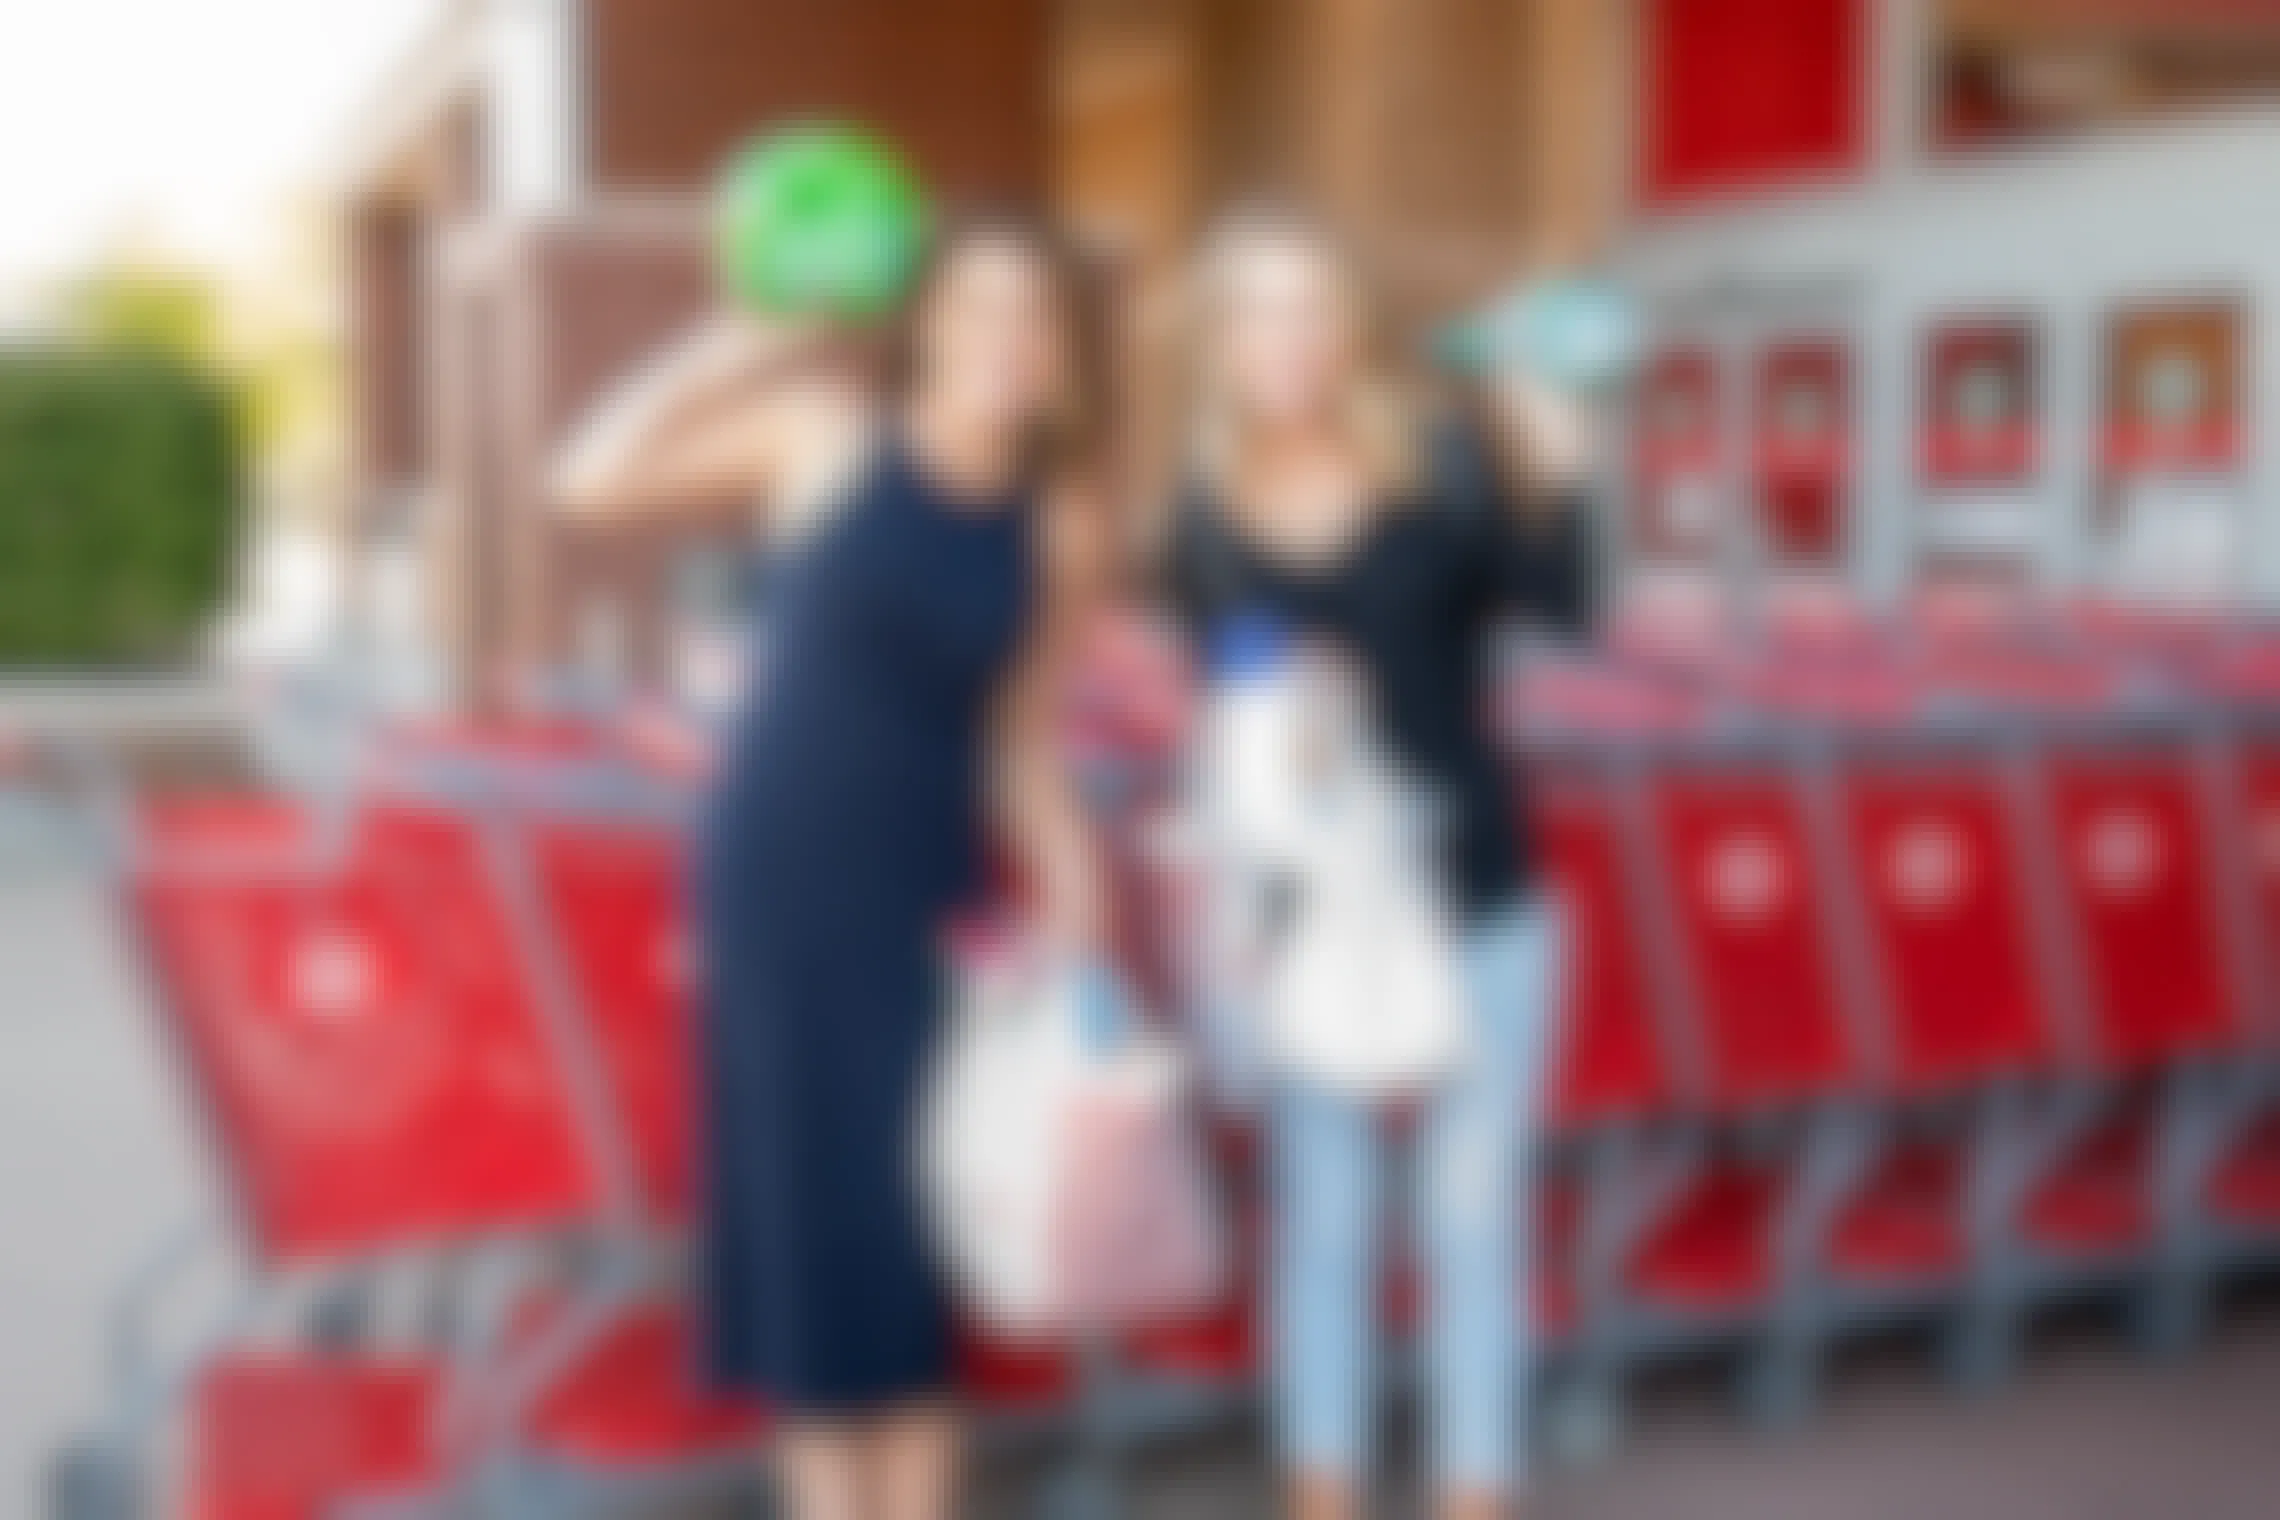 Two women standing outside of a Target storefront in front of a line of Target shopping carts. Both women are holding Target shopping bags and holding up a product that was purchased there.